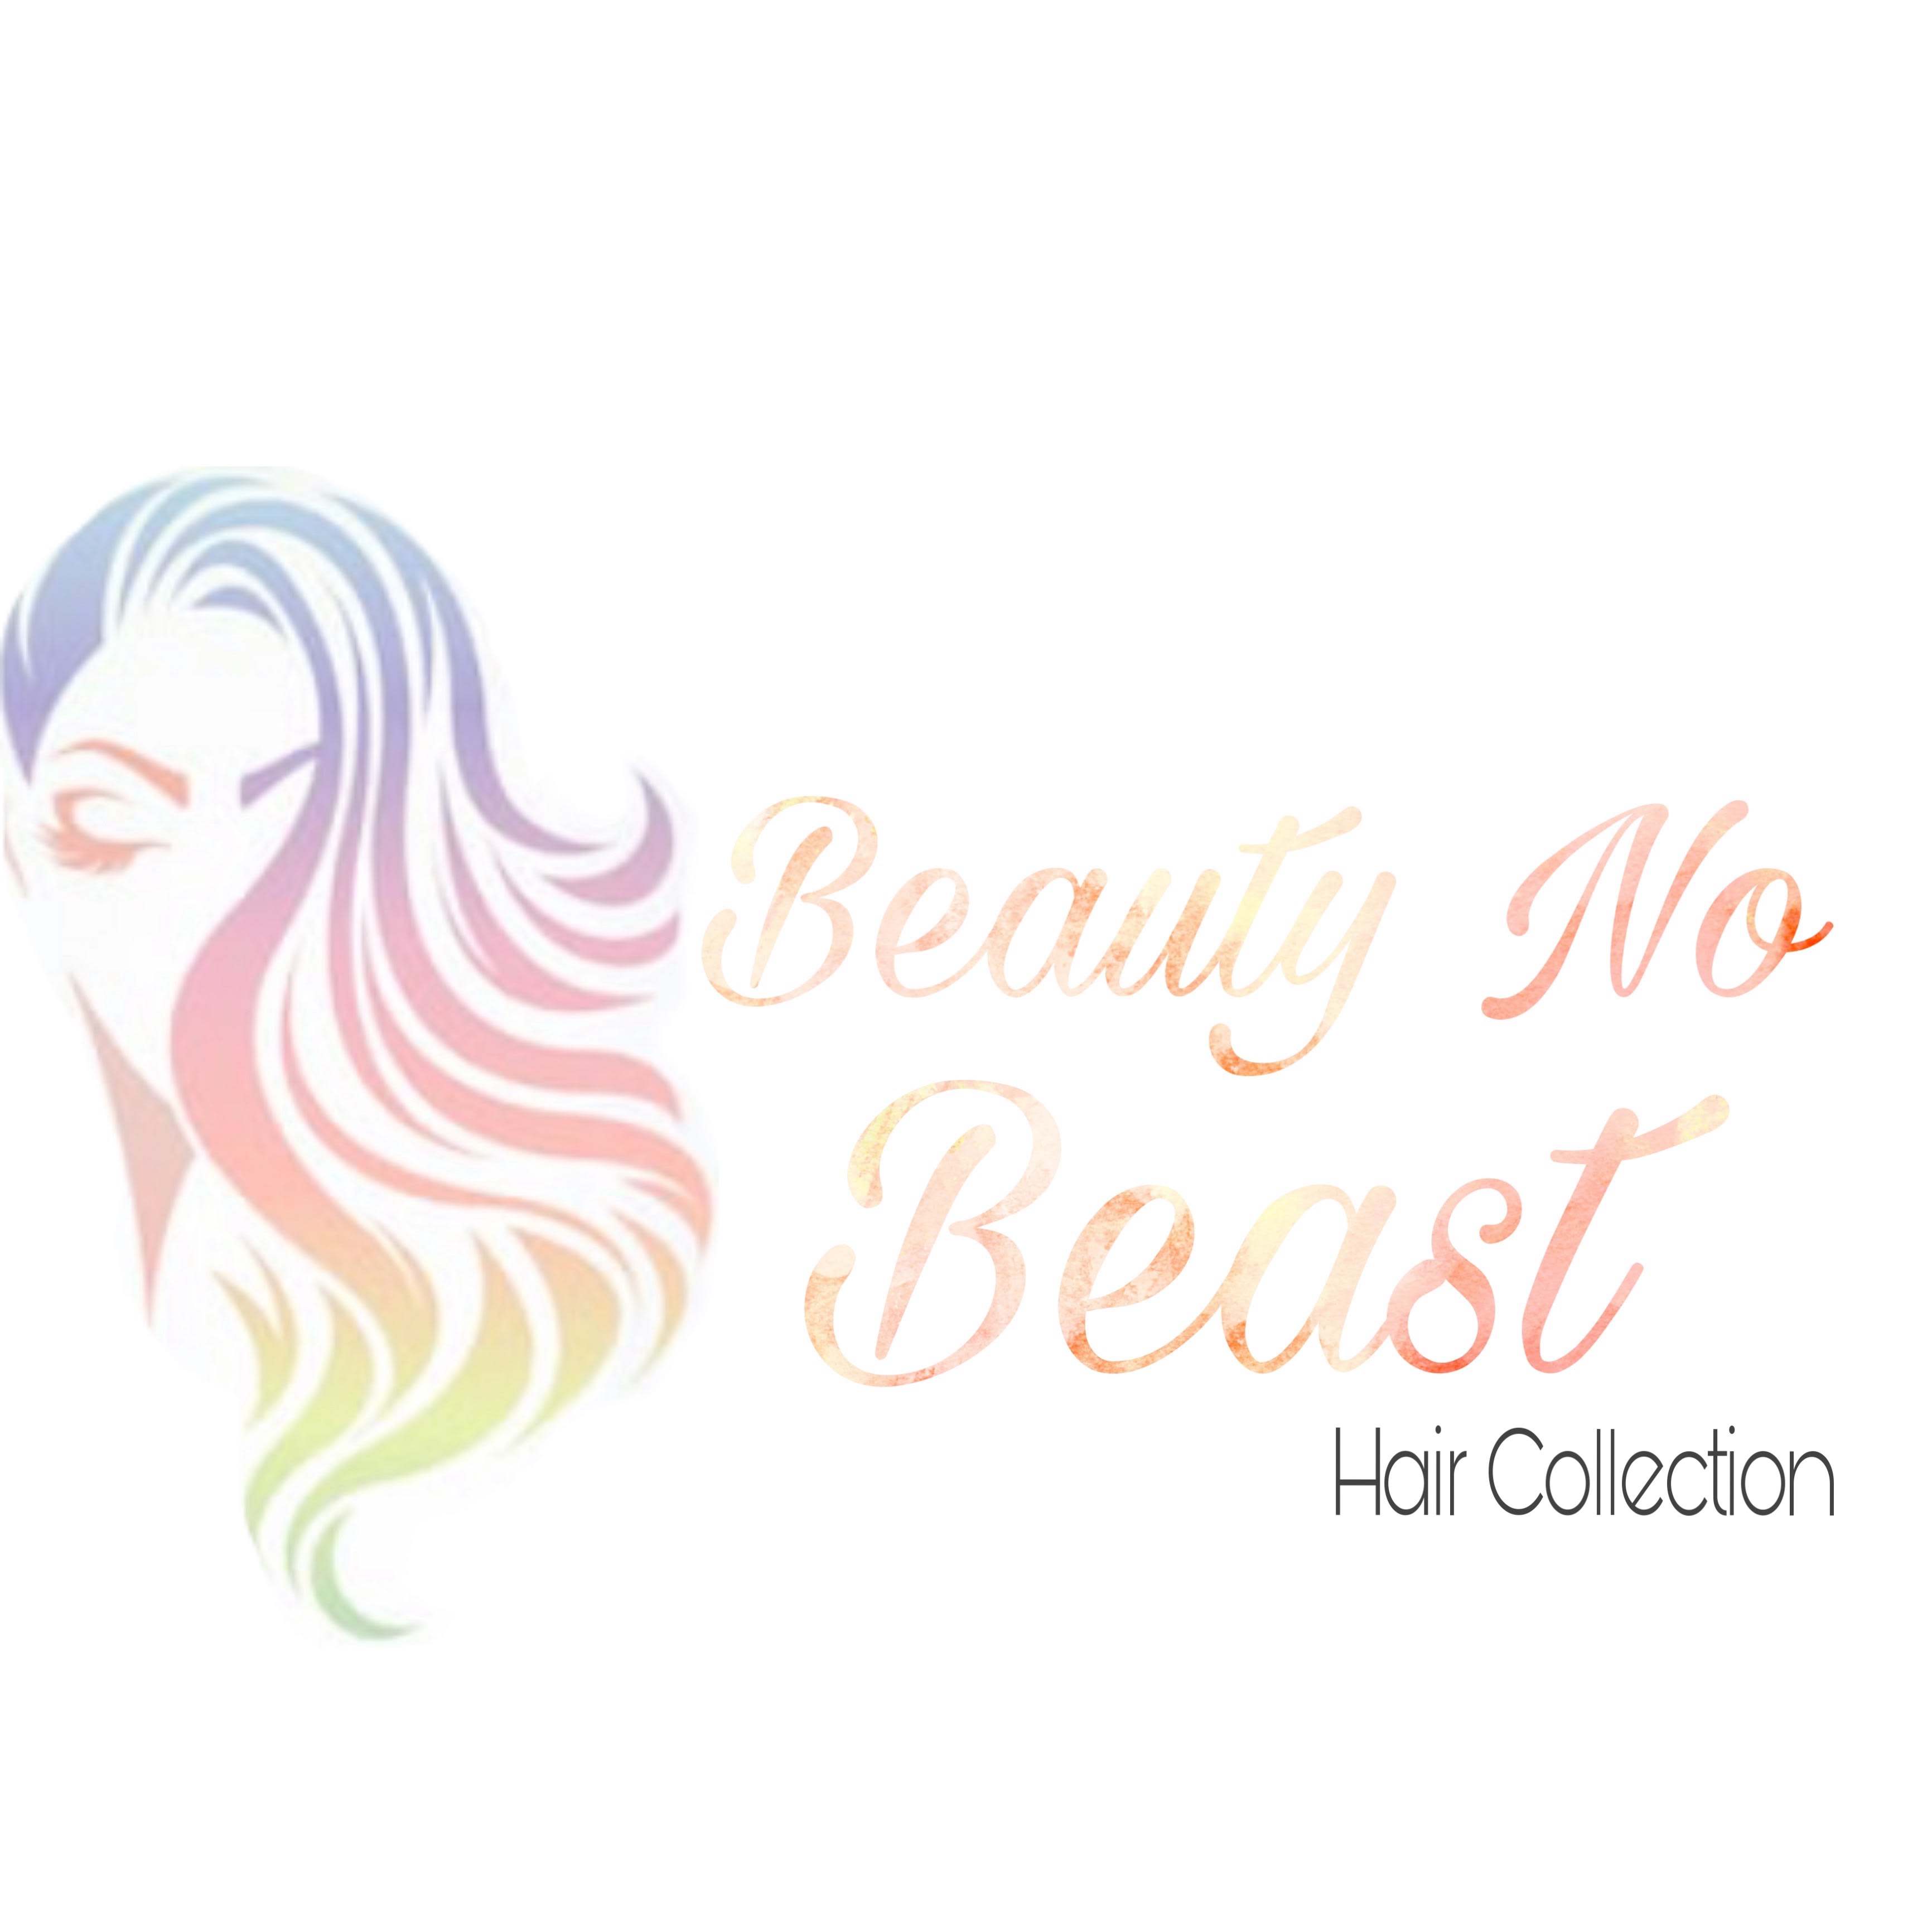 Beauty No Beast Hair Collection